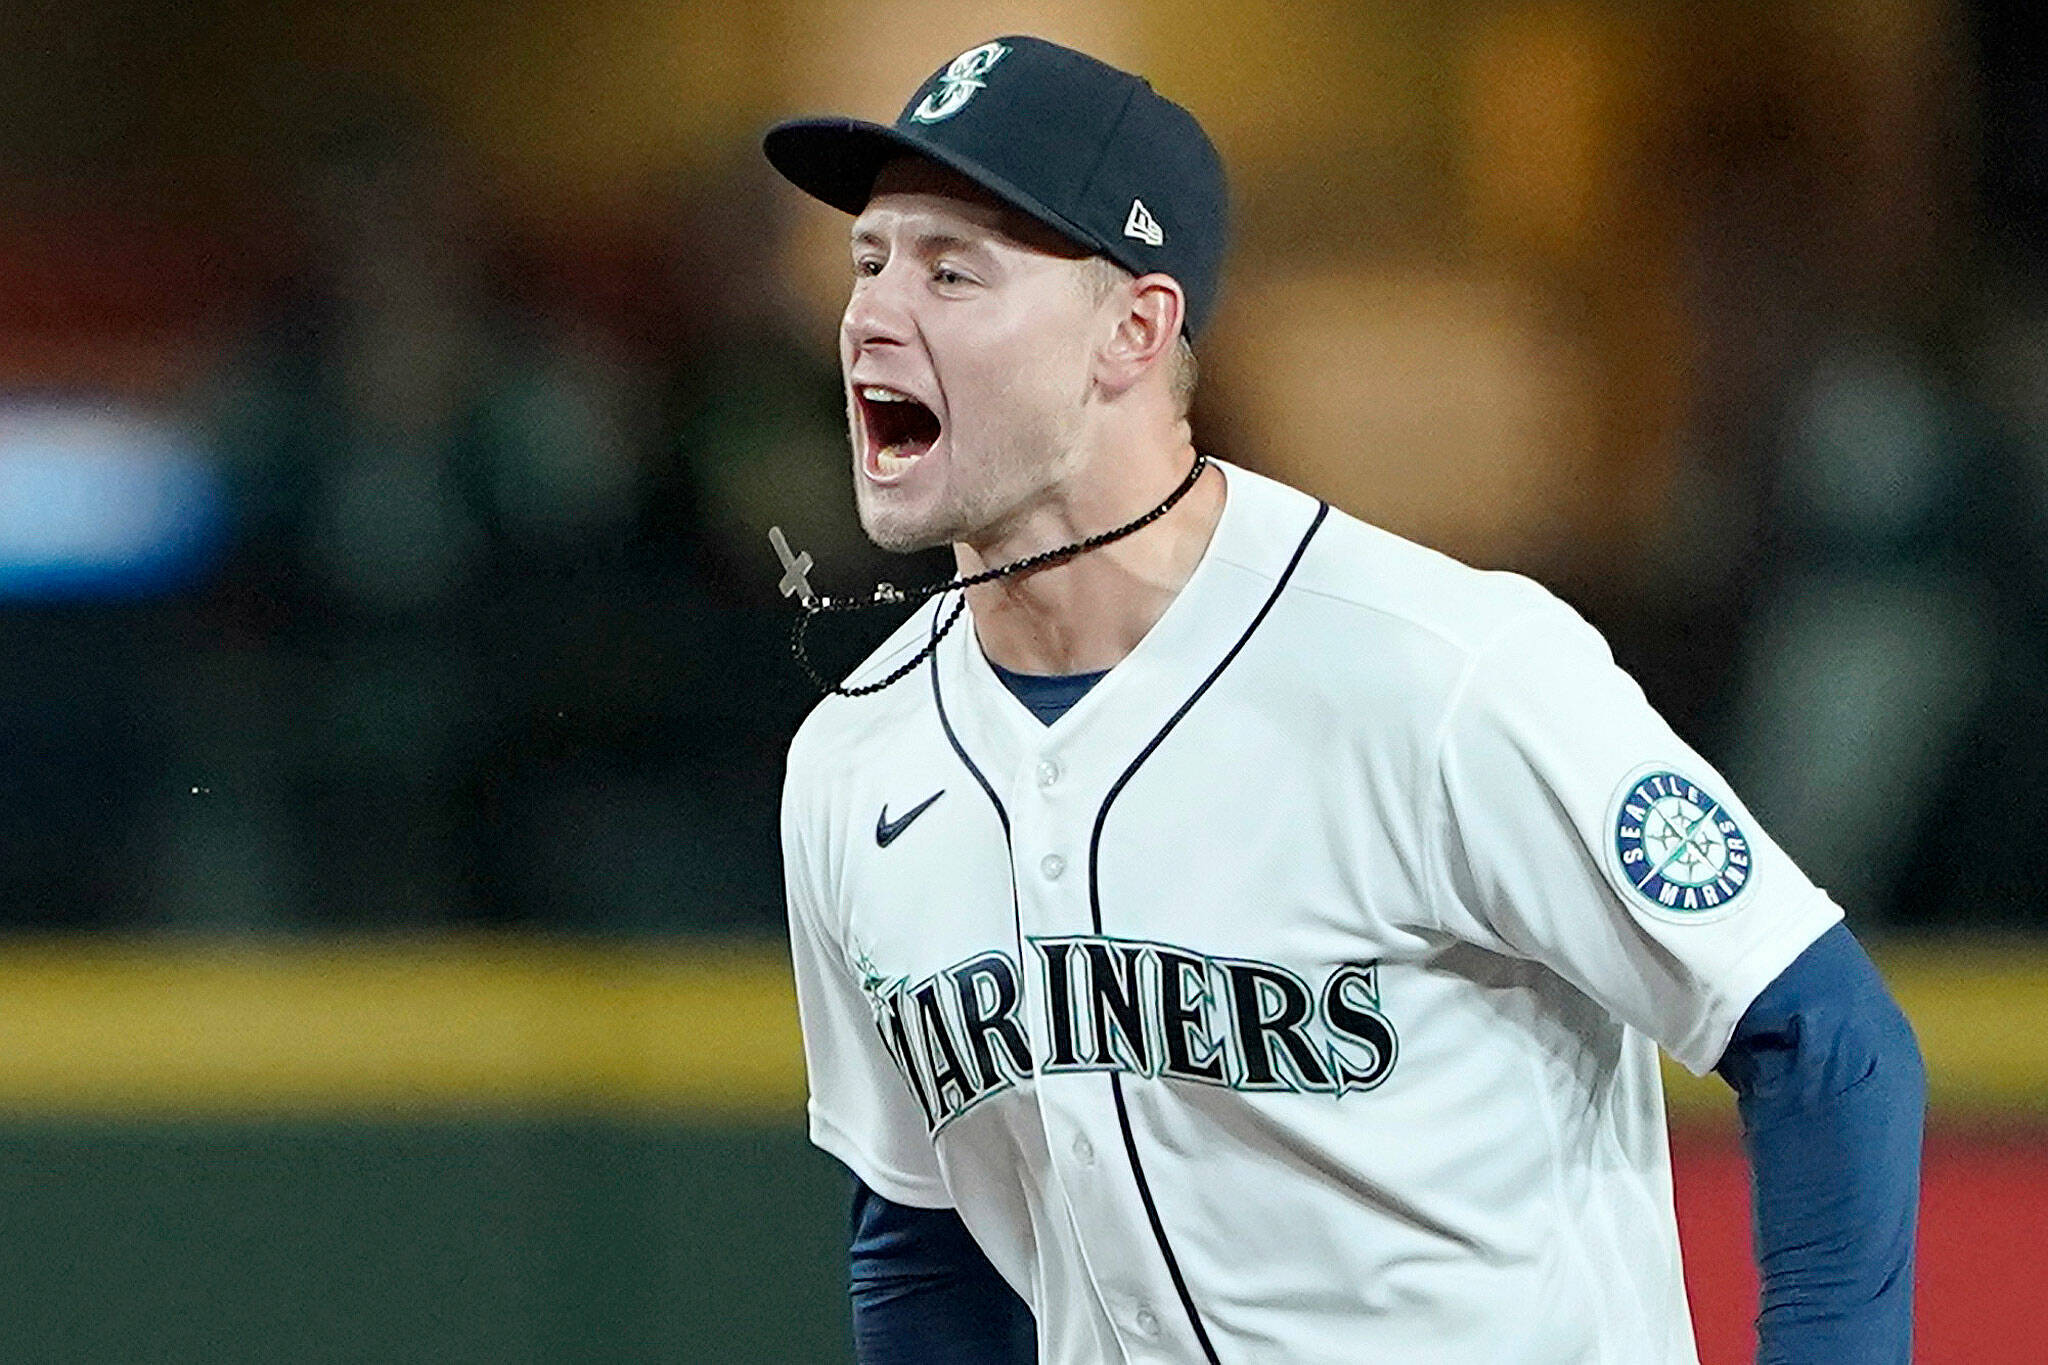 Center fielder Jarred Kelenic reacts after the Mariners beat the Athletics 4-2 on Sept. 29, 2021, in Seattle. (AP Photo/Ted S. Warren)